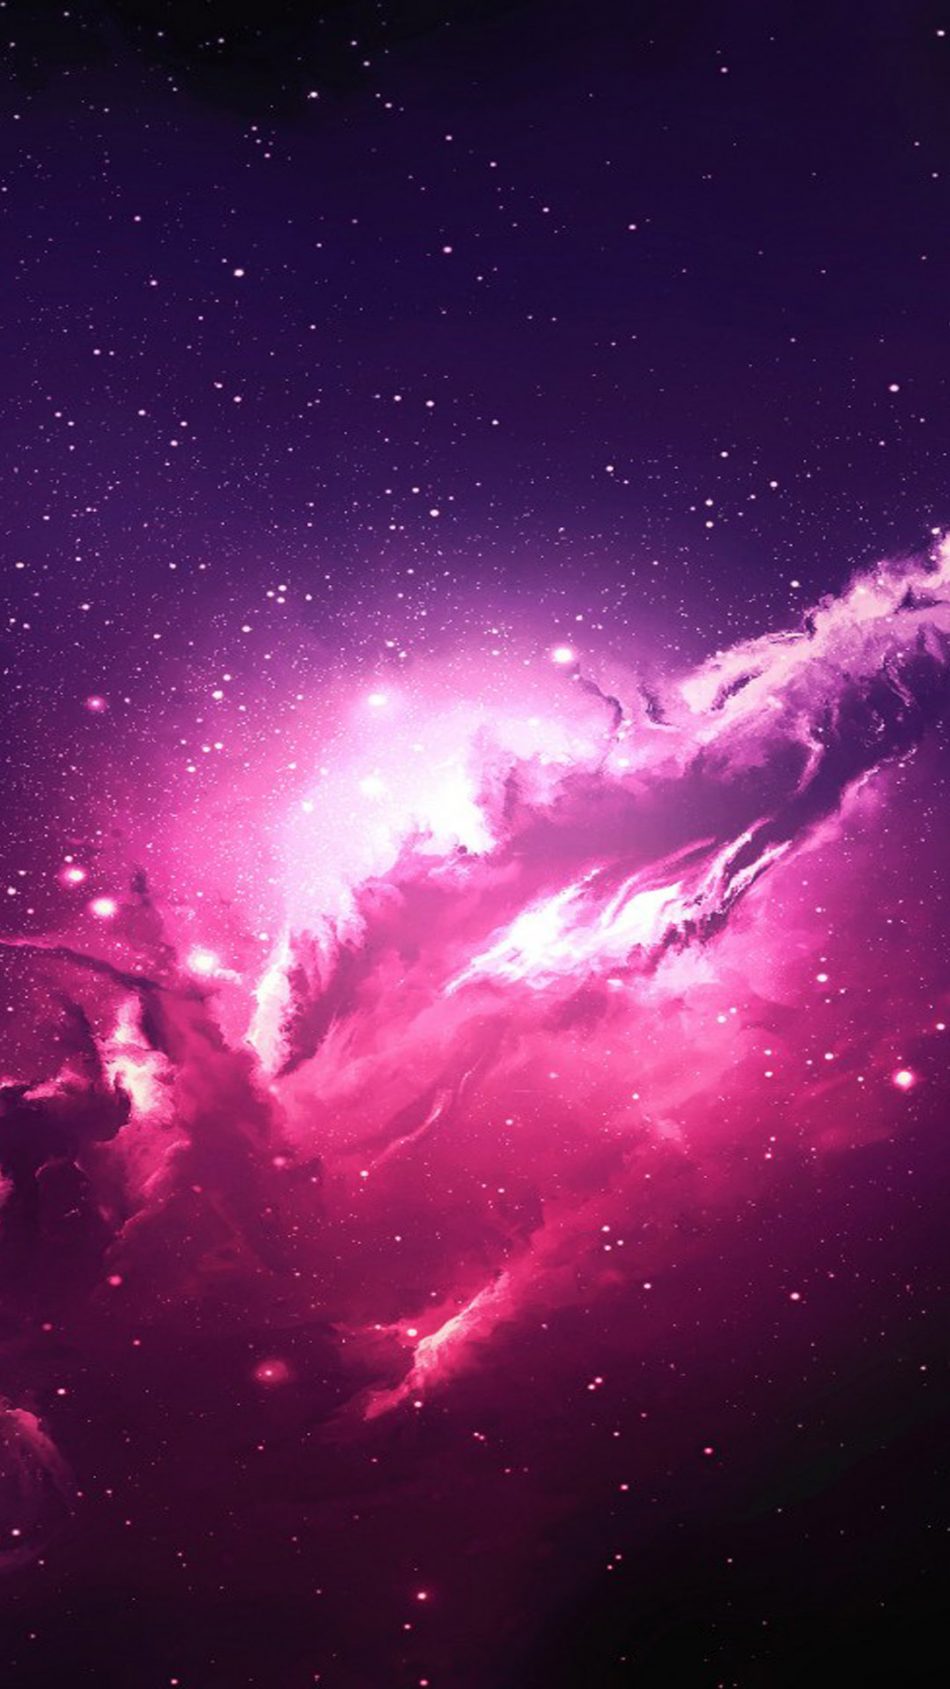 Space Galaxy 4K HD Wallpapers | HD Wallpapers | ID #30976